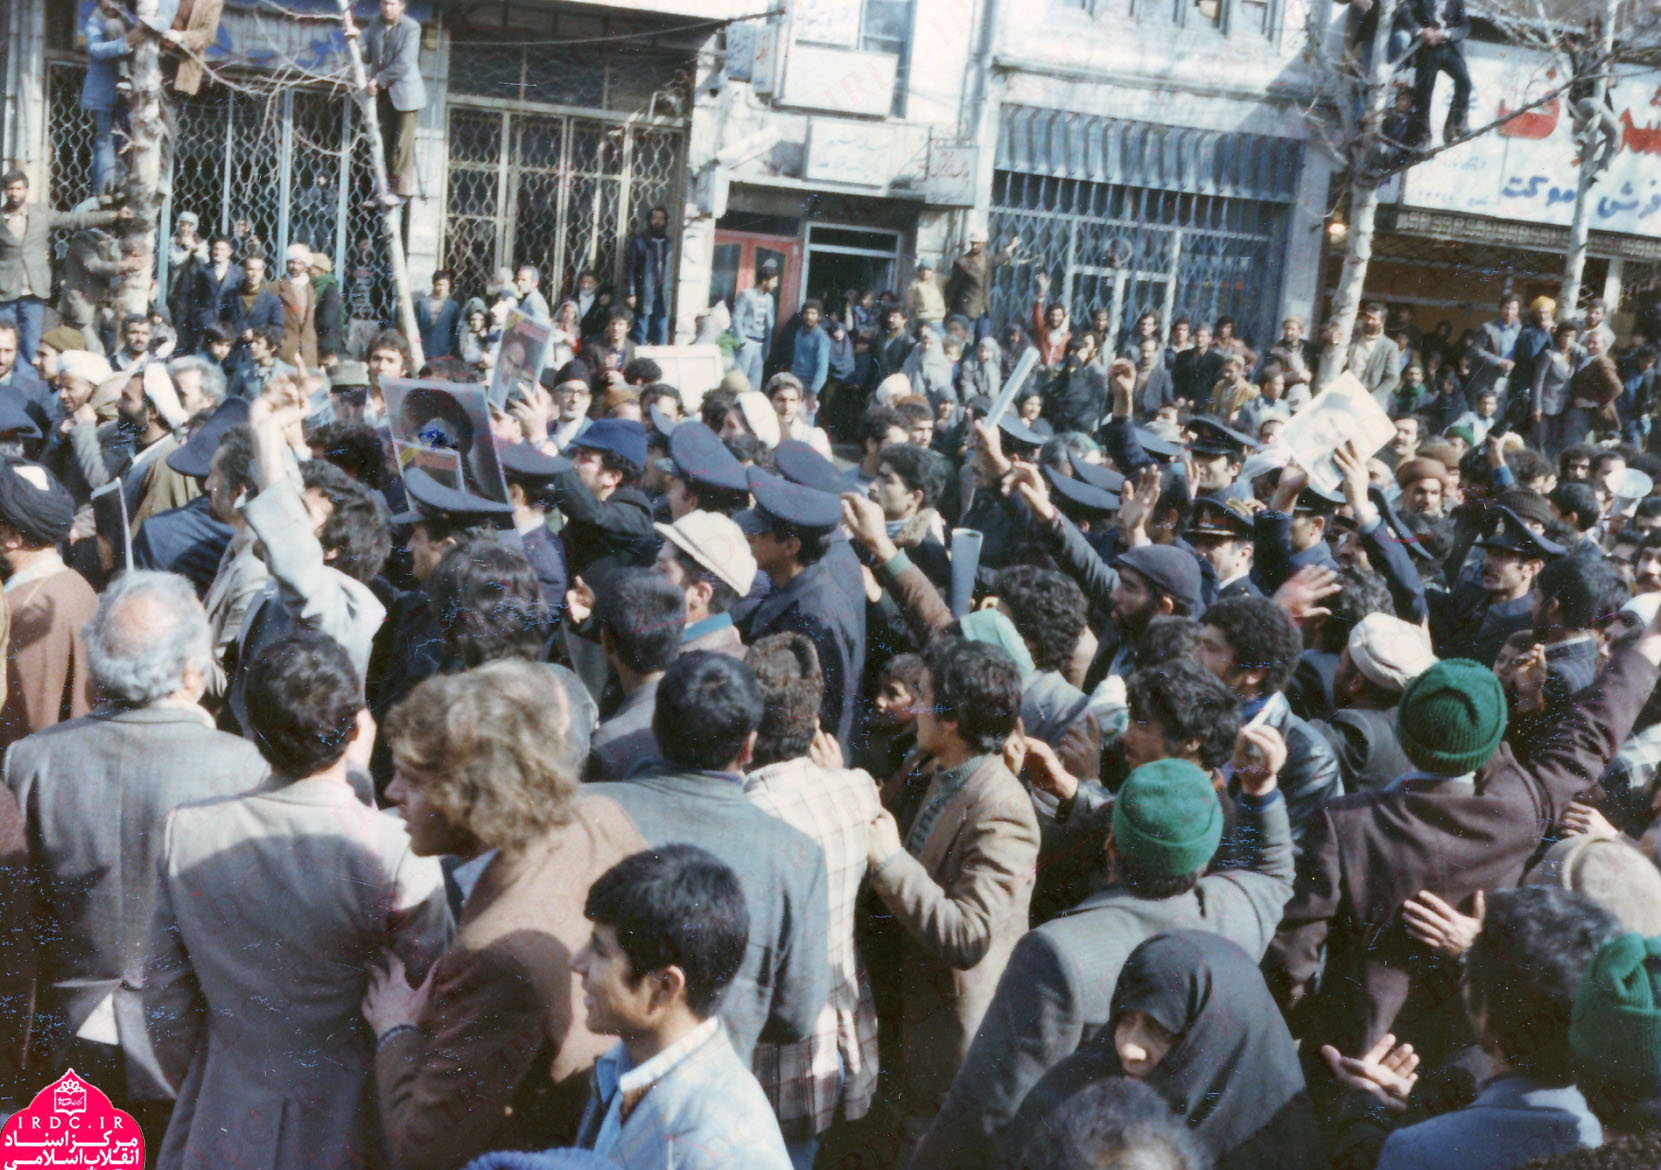 Photos of the Army and People's Unity in the Islamic Revolution of Iran